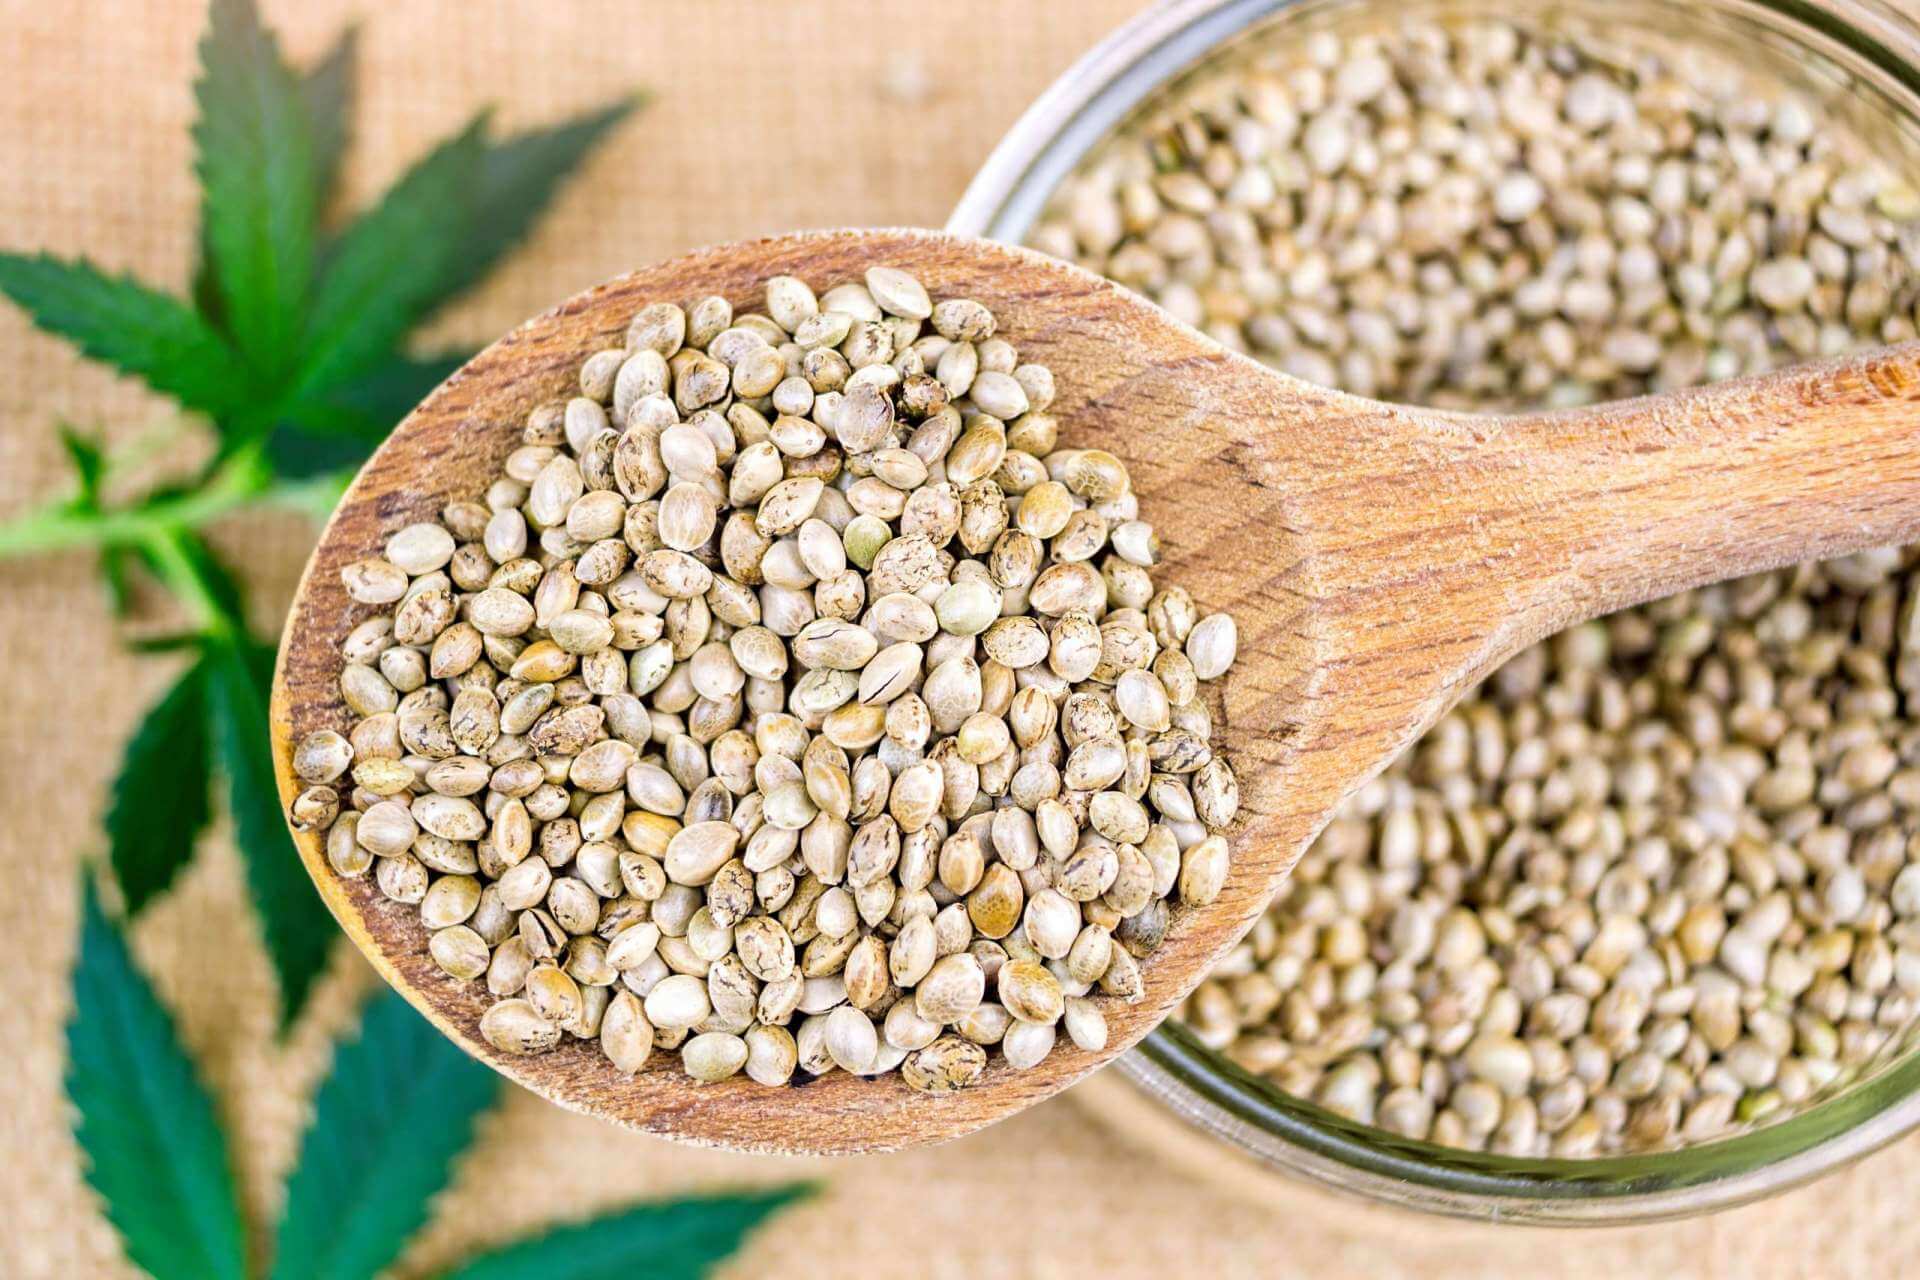 https://www.revivalabs.com/wp-content/uploads/2021/04/cannabis-seeds-in-wooden-spoon-on-hemp-cloth-and-h-QLEYL94-scaled.jpg